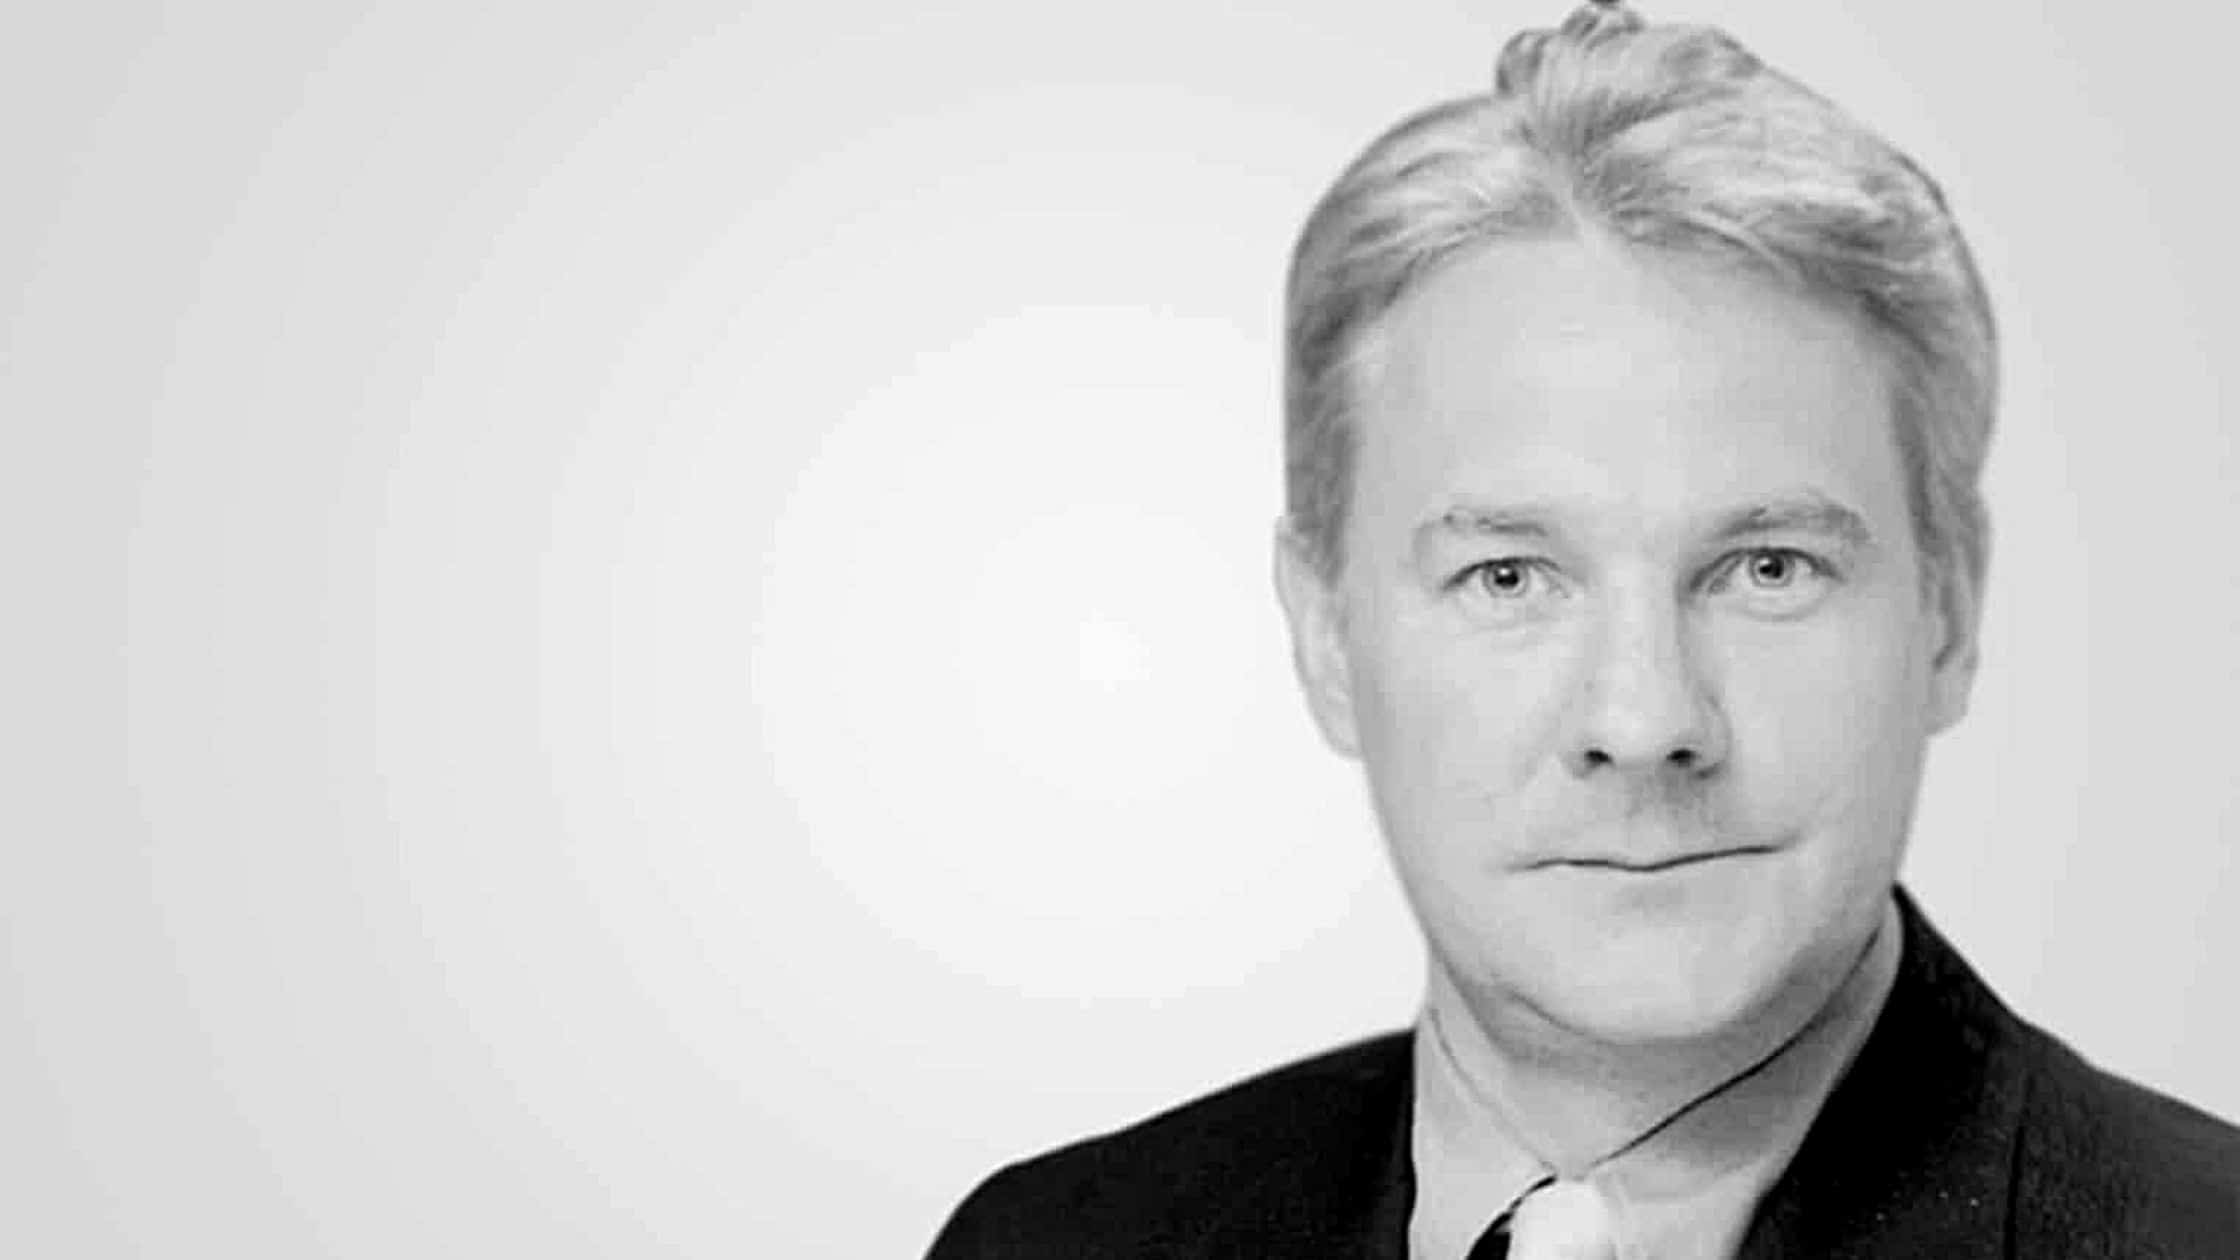 Sandpiper Communications Appoints Philip Channon as Global Chief Financial Officer to Support Expansion